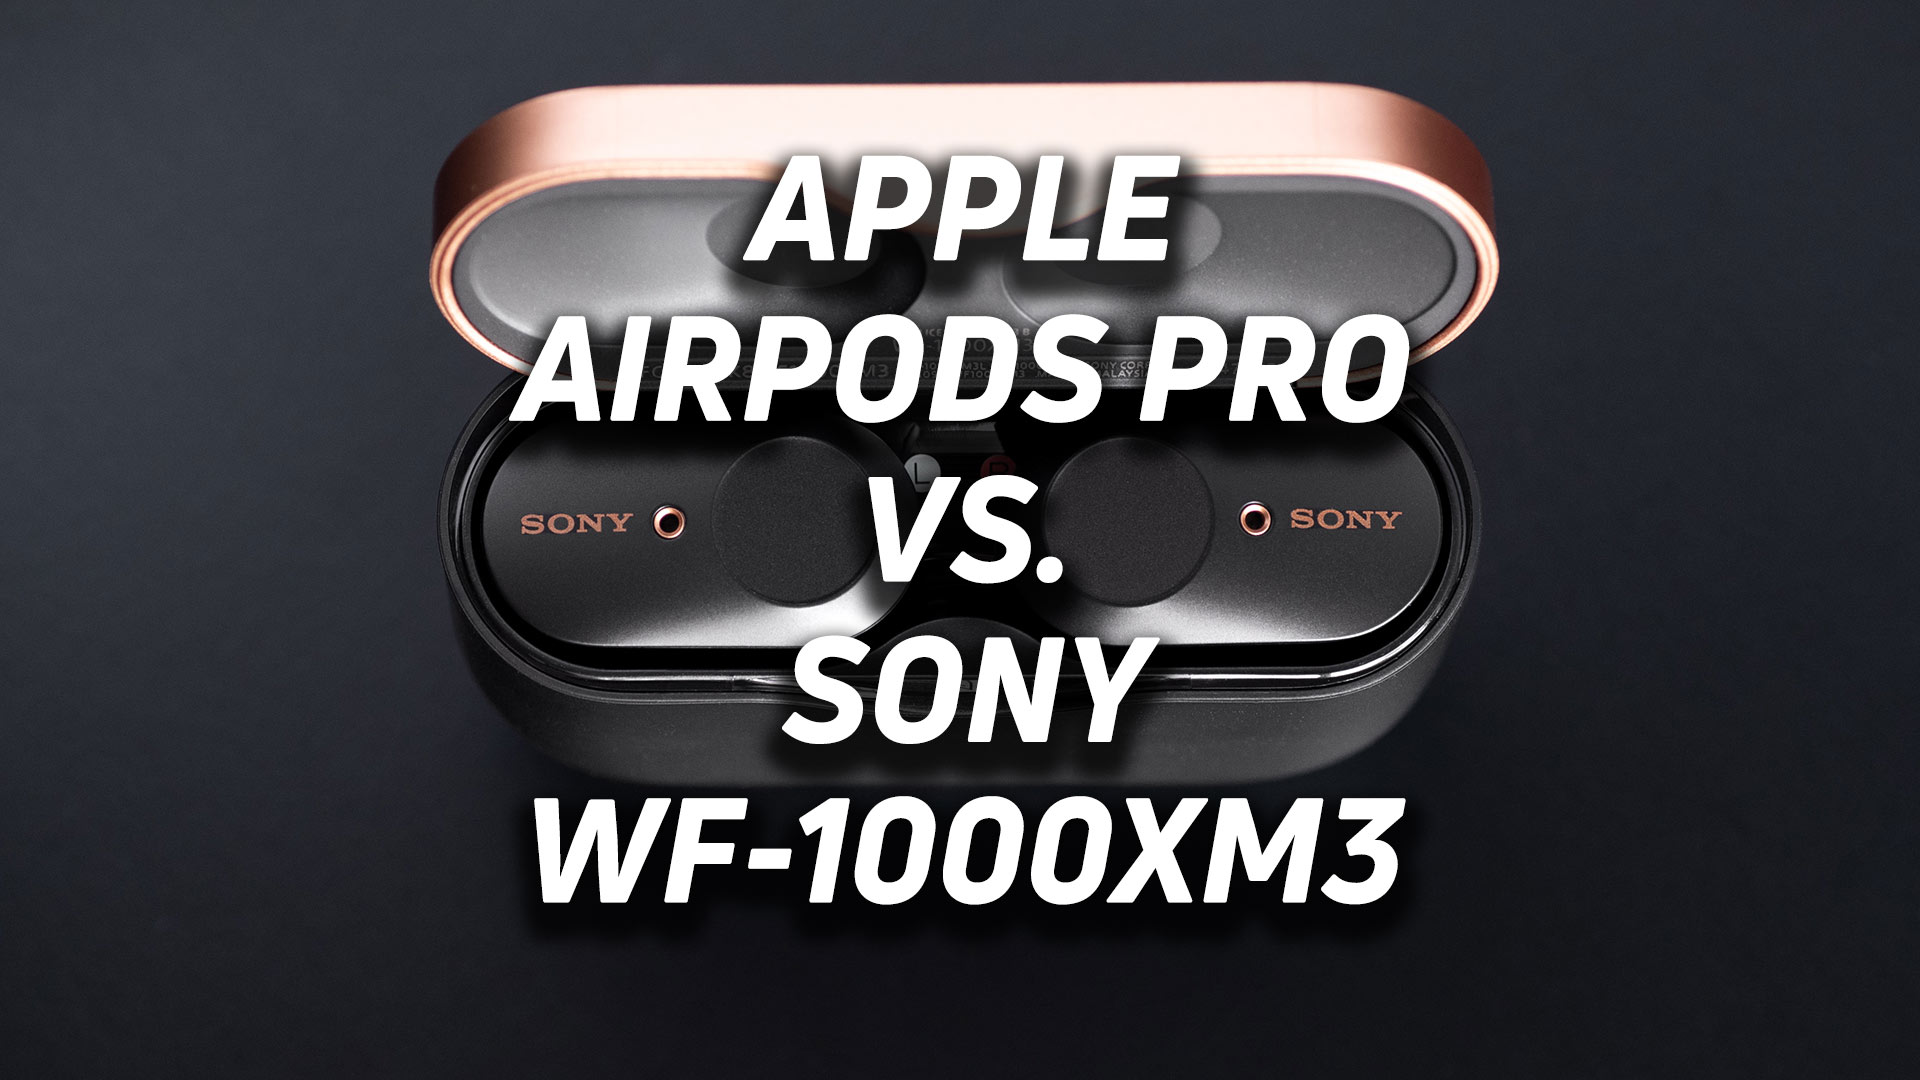 Aerial image of the Sony WF-1000XM3 true wireless noise canceling earbuds in the case with the text, "Apple AirPods Pro vs. Sony WF-1000XM3" overlaid.